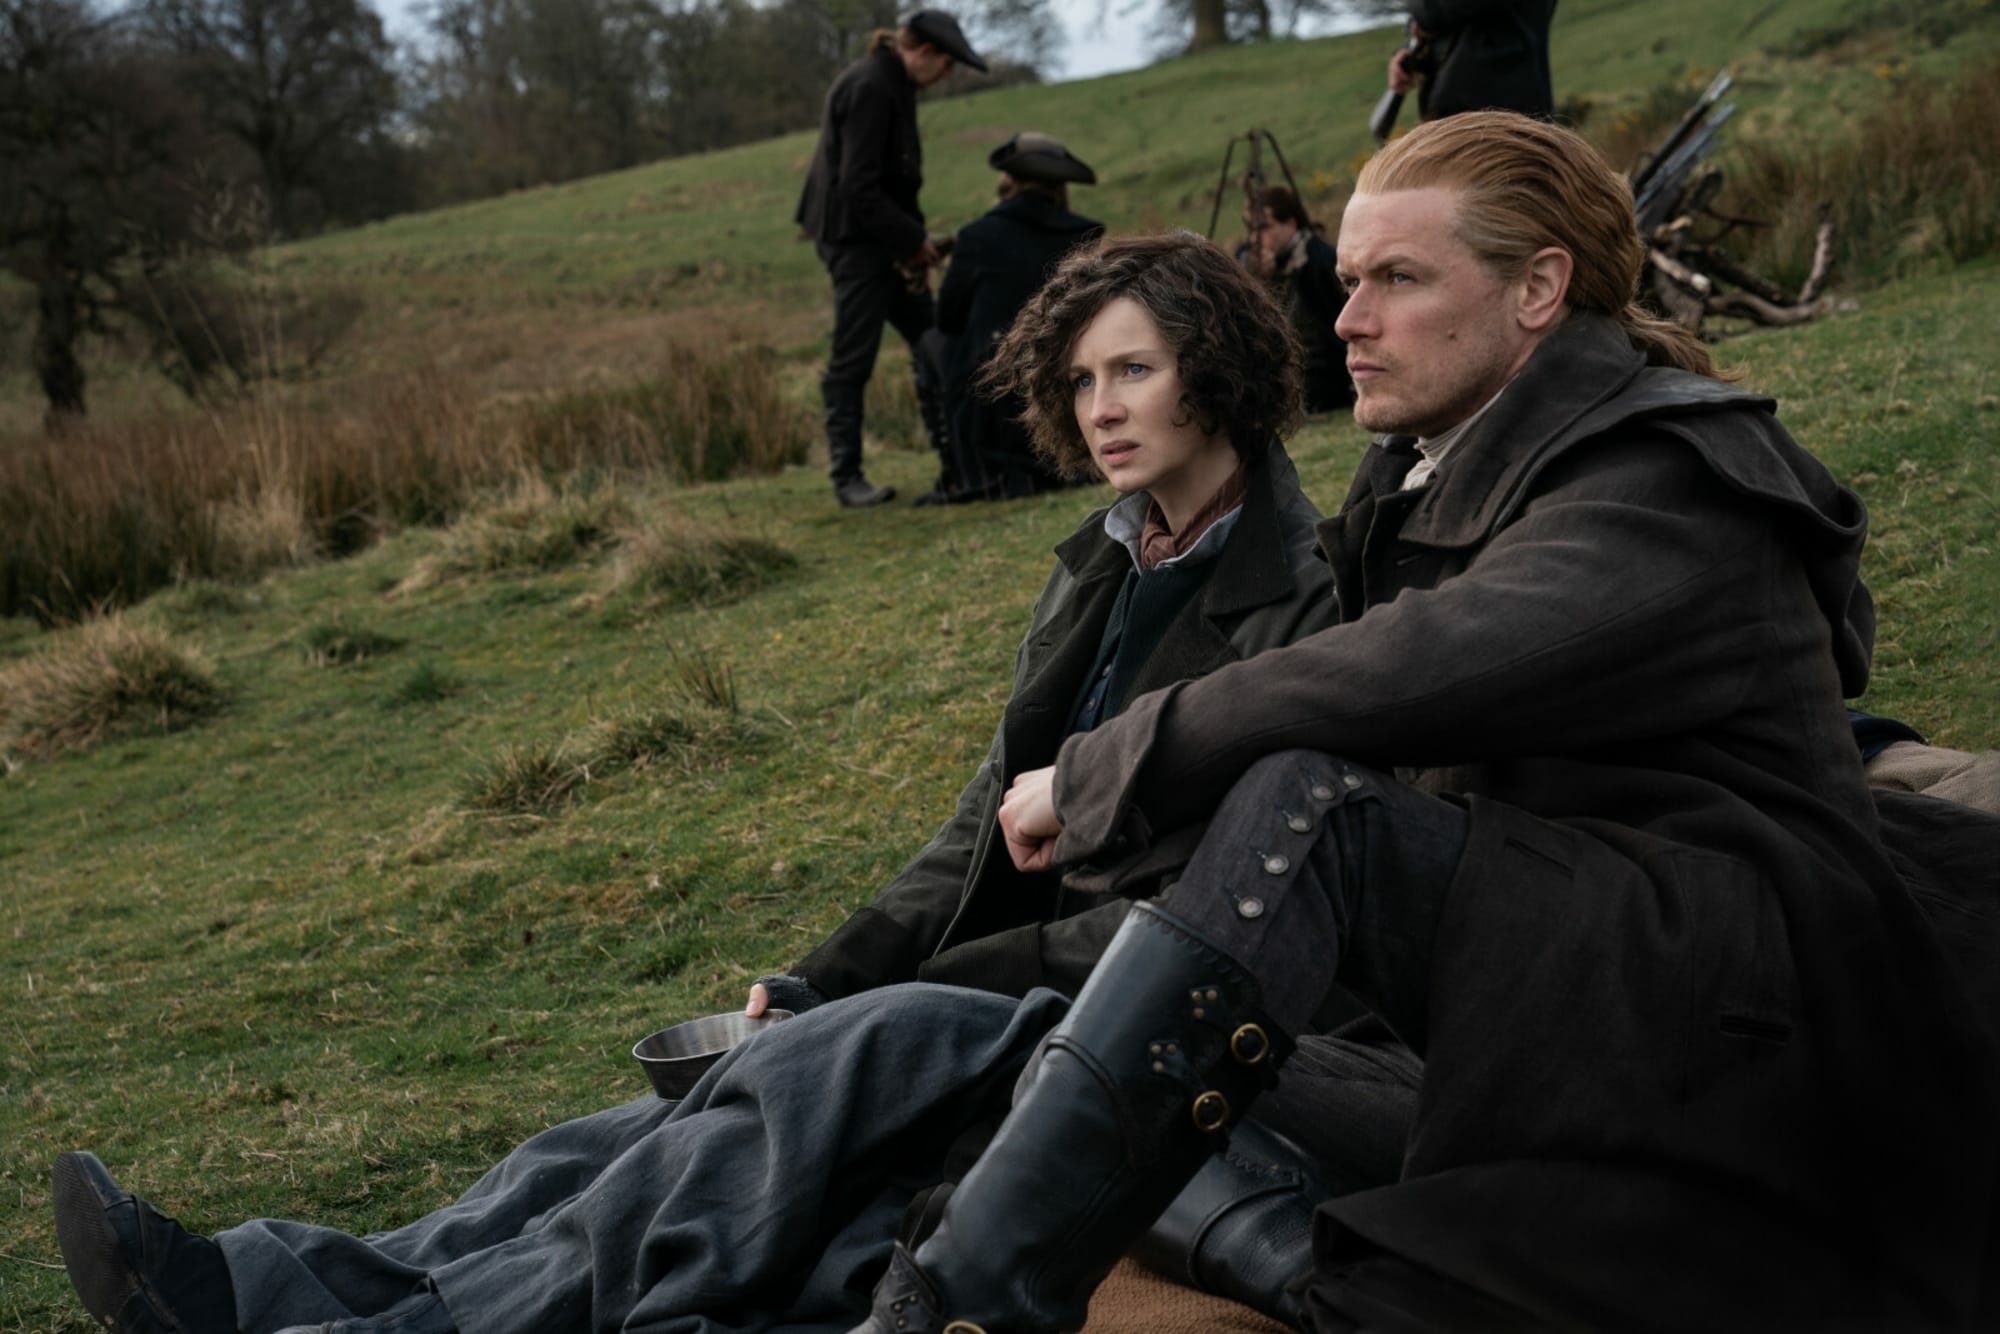 Season 6 of Outlander will not be coming to Netflix in July 2022